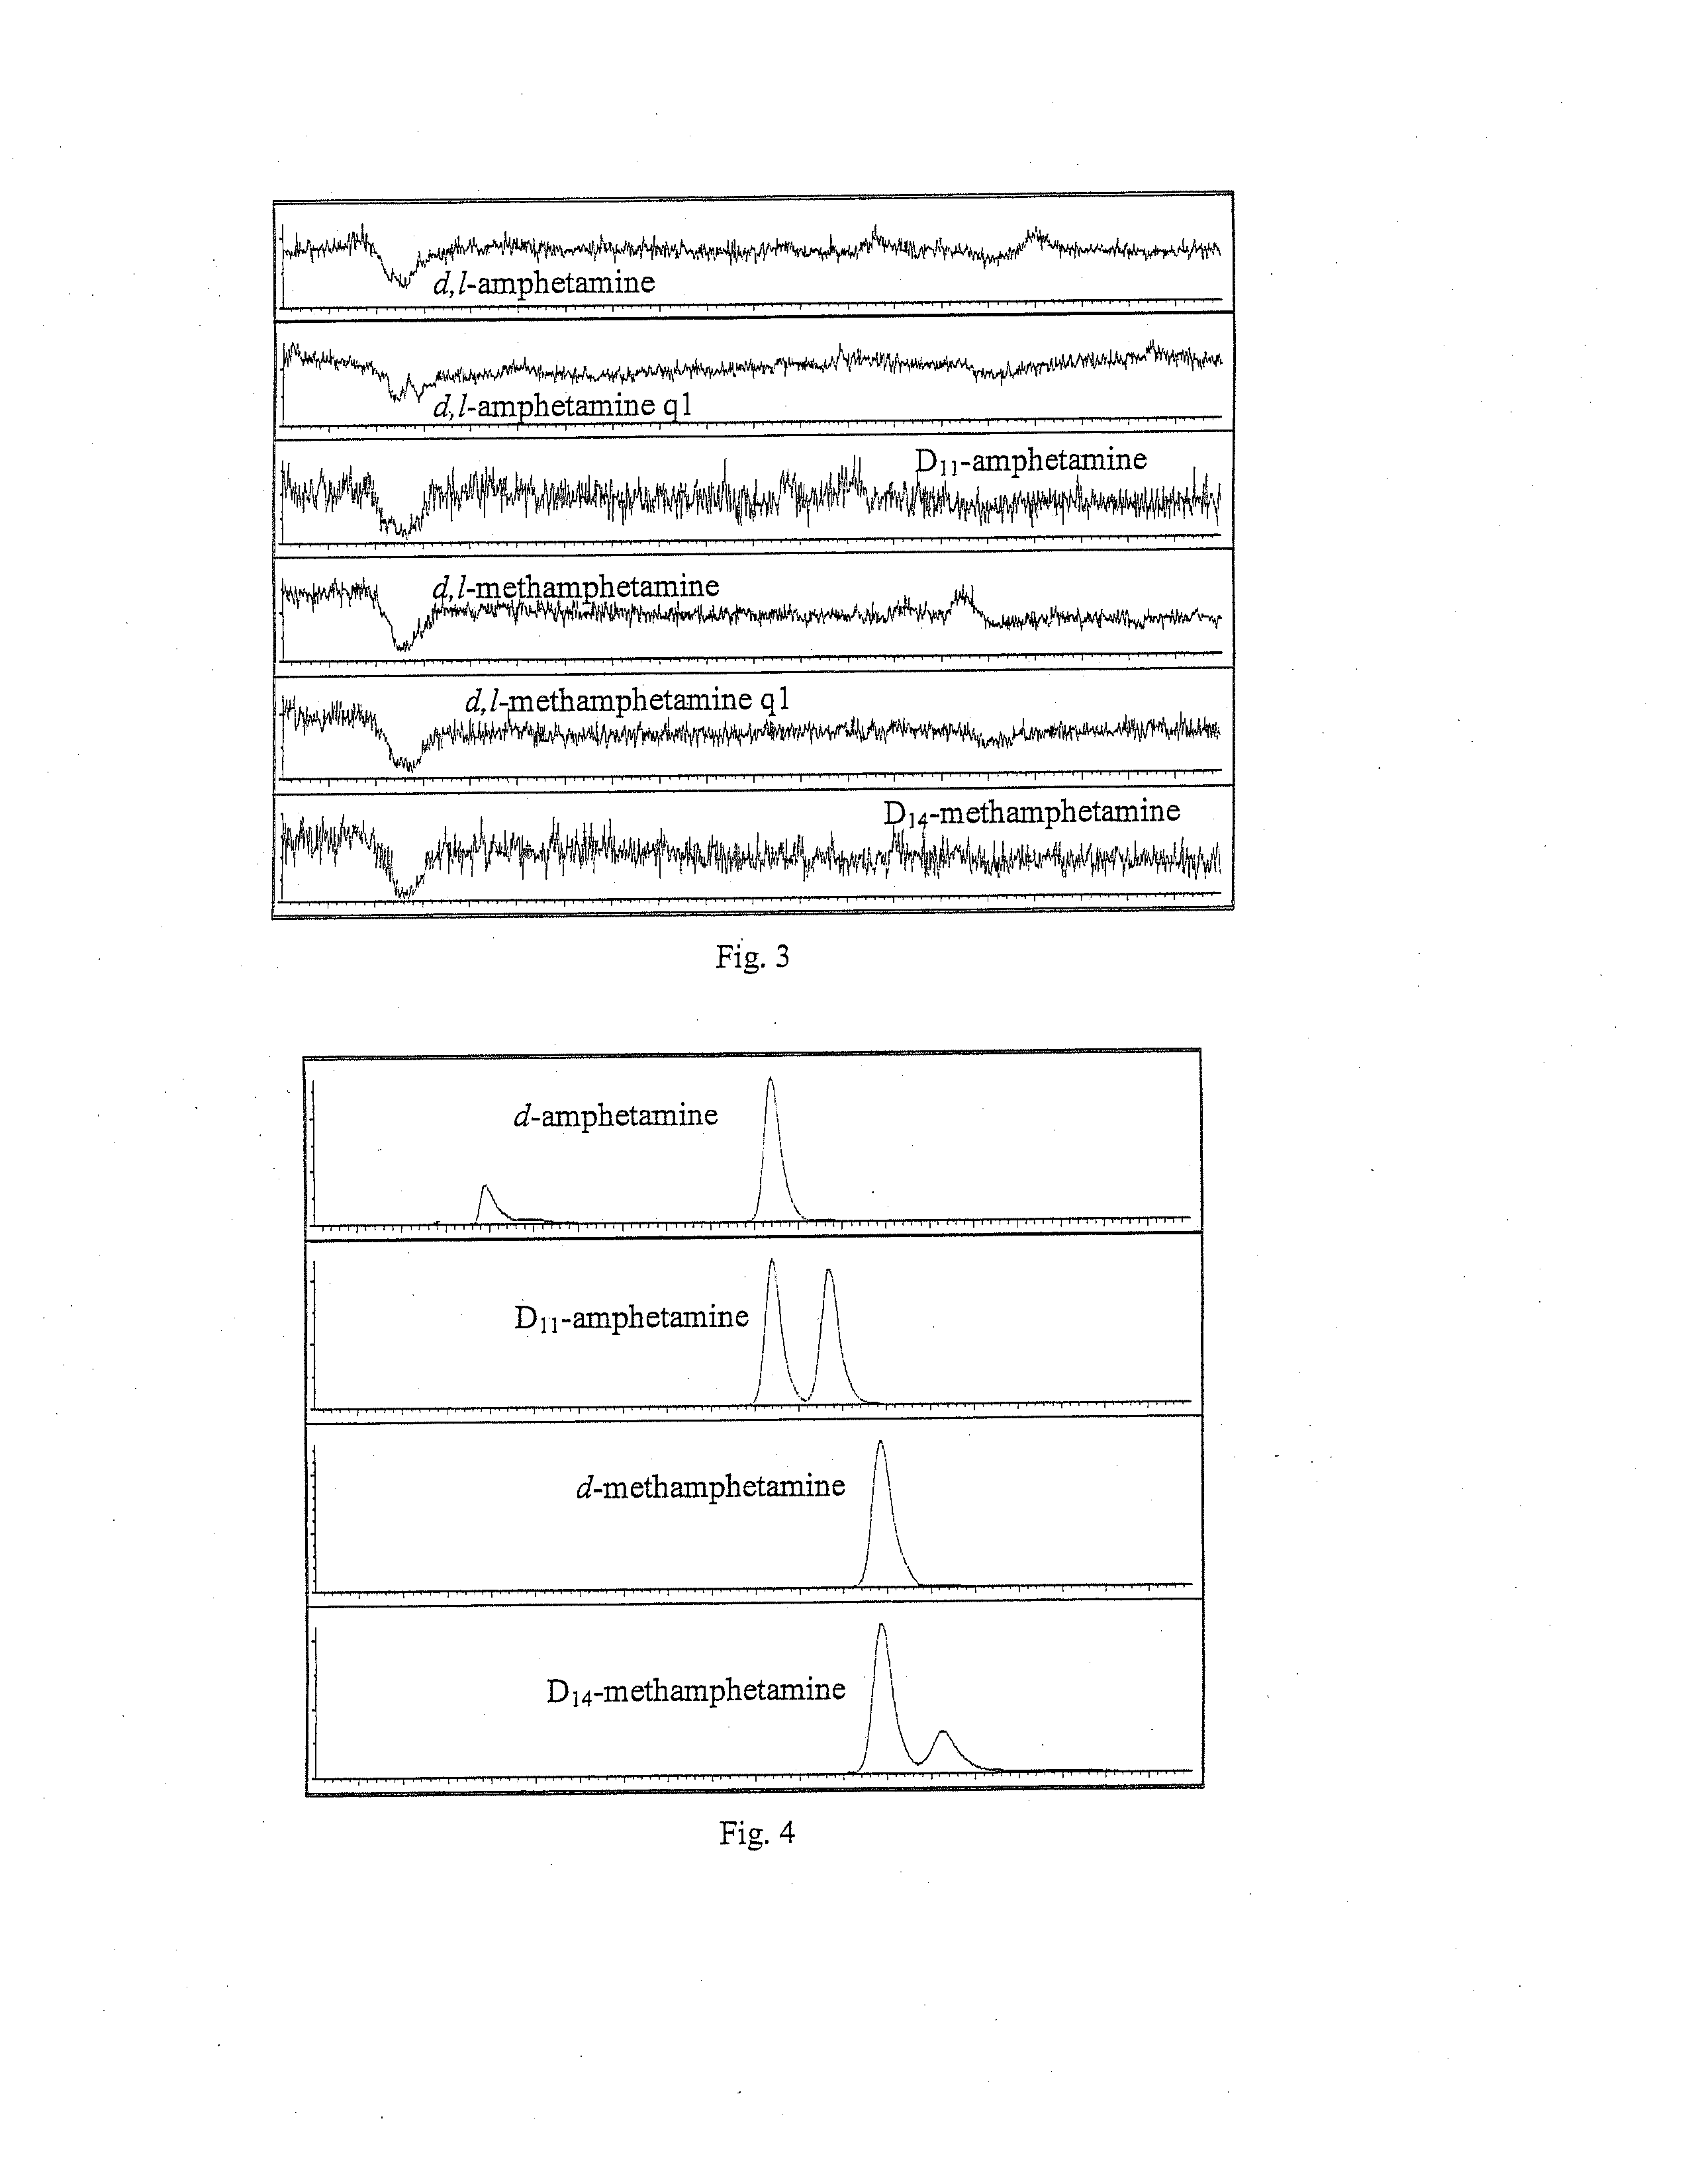 METHODS FOR QUANTITATIVE CHIRAL DETERMINATION OF THE d- AND l- ENANTIOMERS OF AMPHETAMINE AND METHAMPHETAMINE